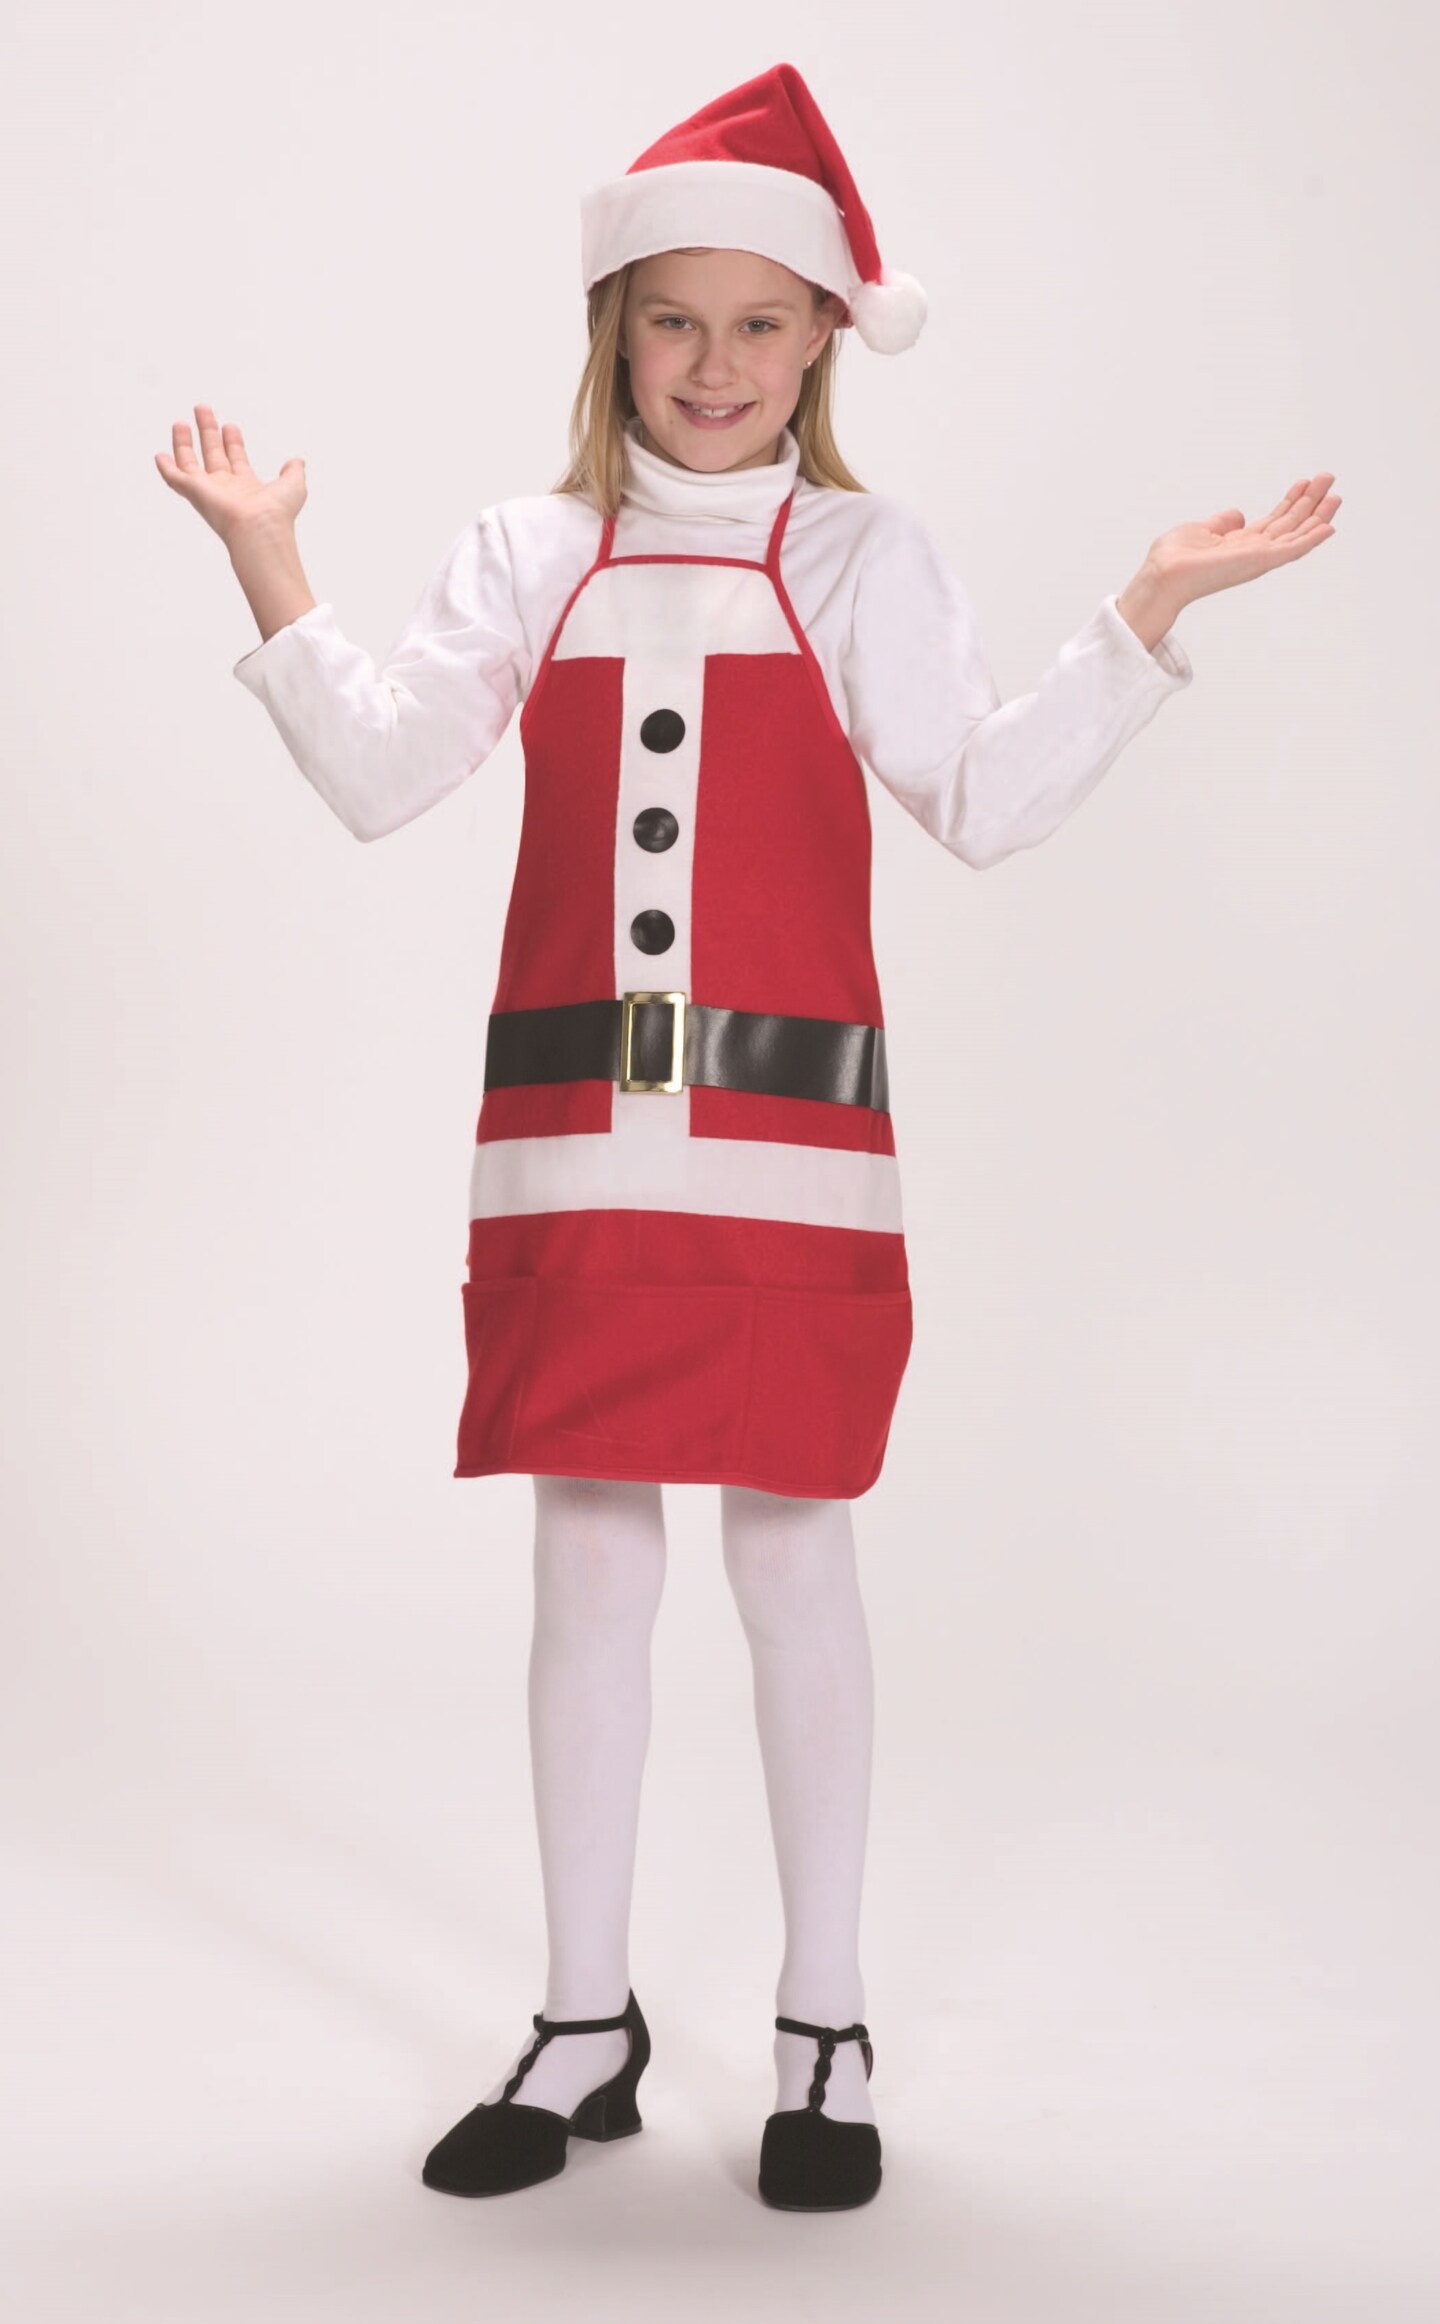 The Costume Center Red and White Christmas Apron and Matching Hat - Child Size S/M